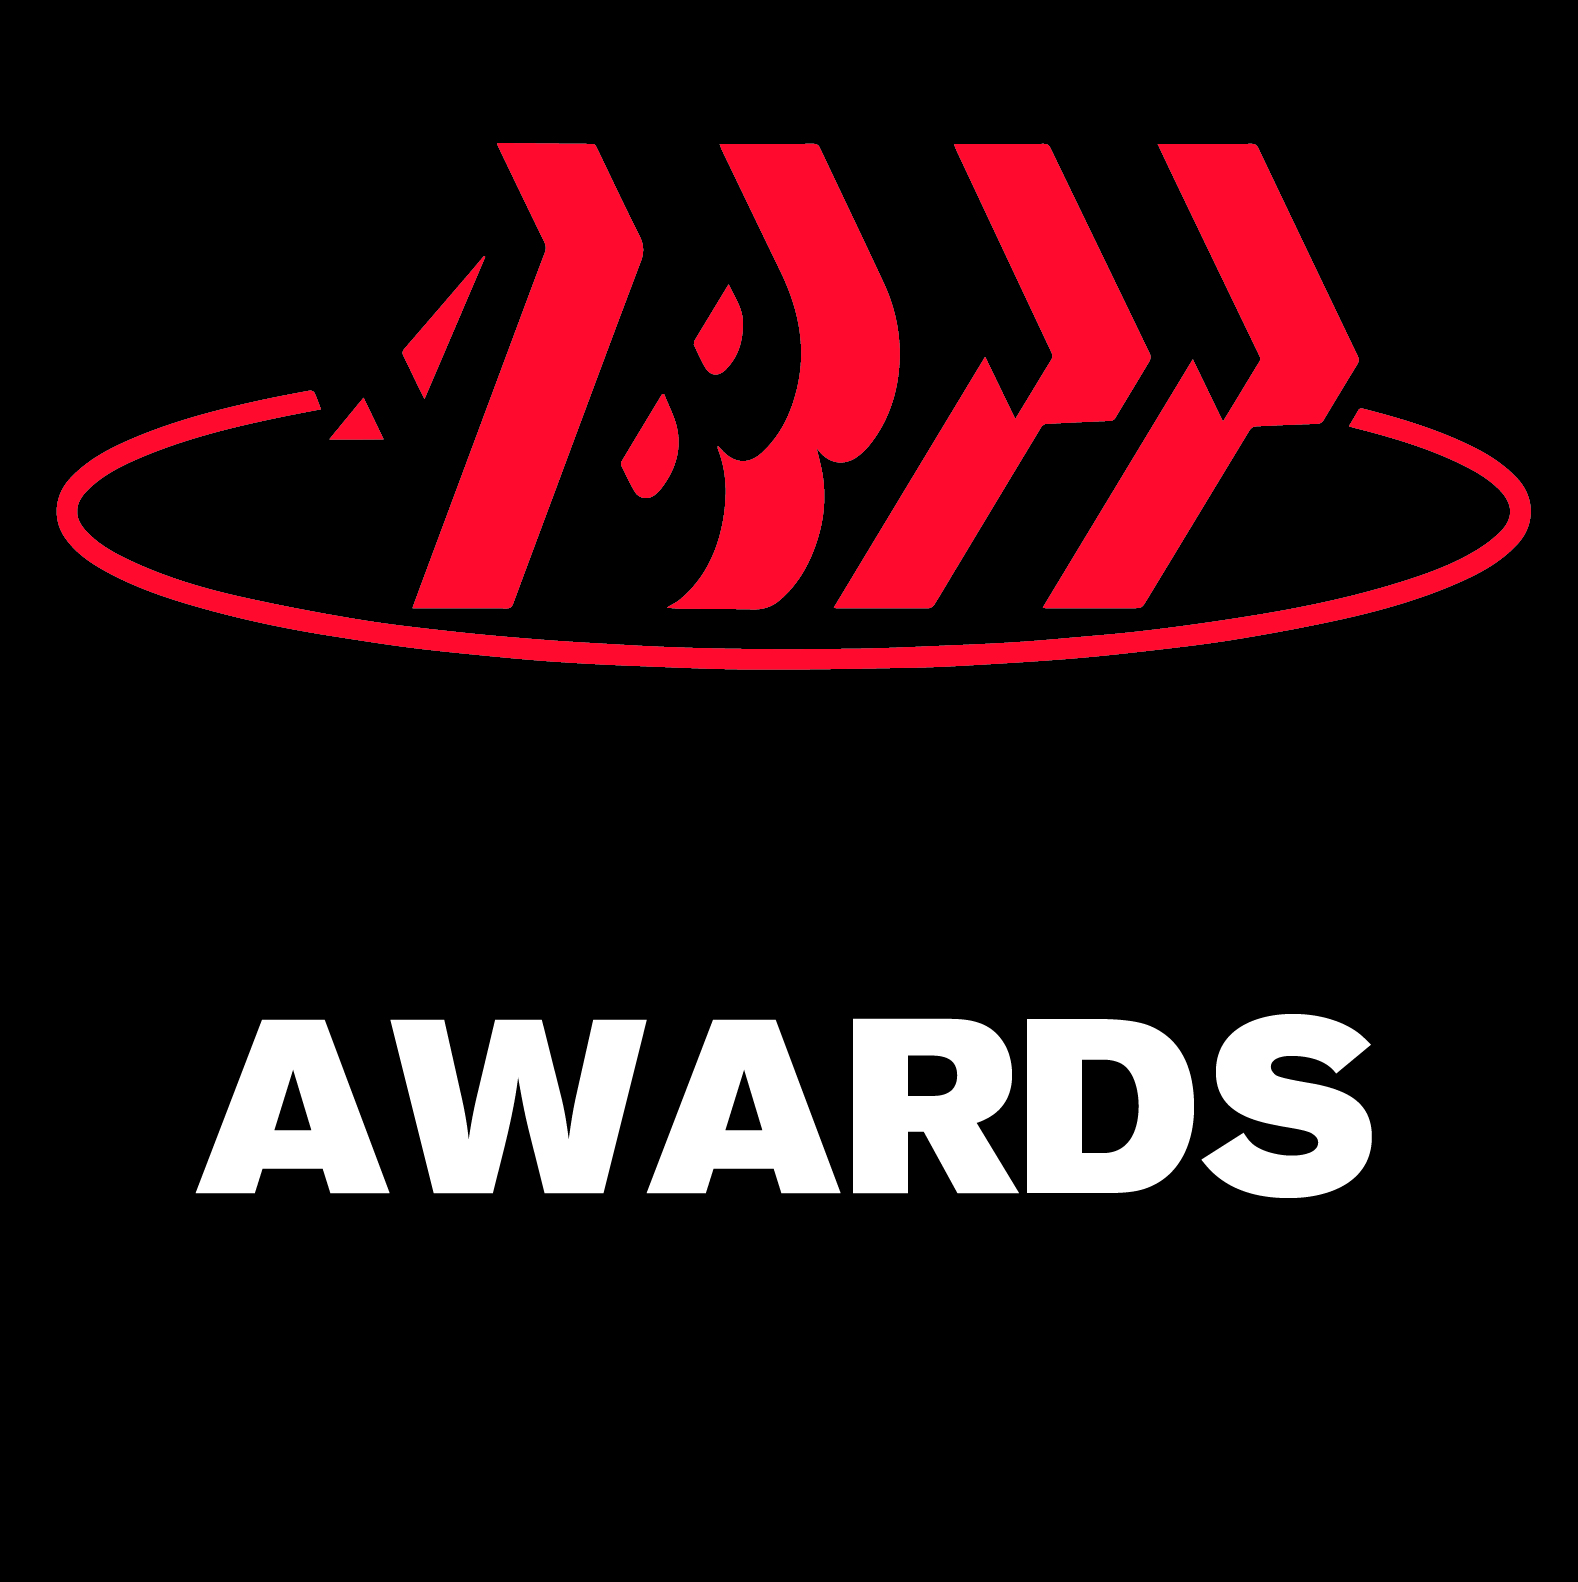 DMXcat was recognized at the ABTT Awards 2017